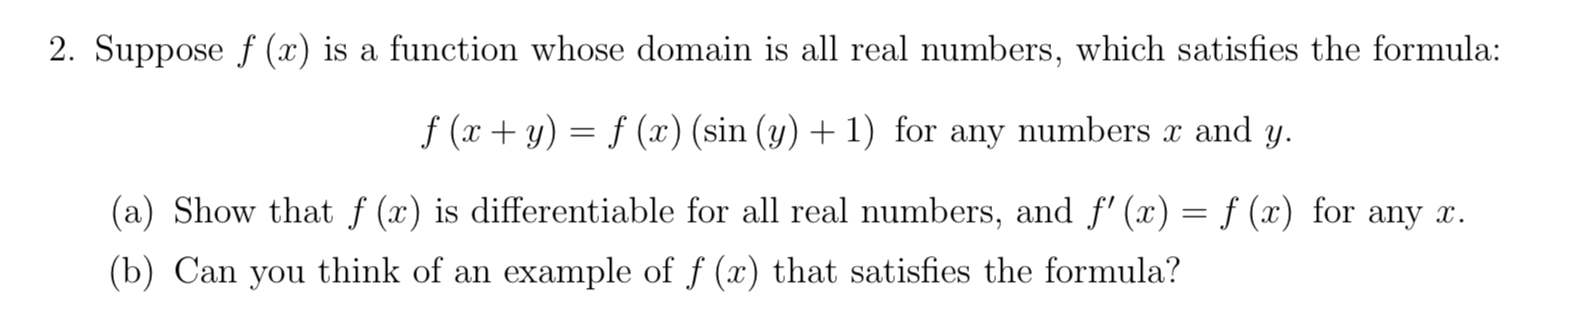 2. Suppose f (x) is a function whose domain is all real numbers, which satisfies the formula:
f (x + y) = f (x) (sin (y) + 1) for any numbers x and y.
(a) Show that f (x) is differentiable for all real numbers, and f' (x) = ƒ (x) for any x.
(b) Can you think of an example of f (x) that satisfies the formula?
